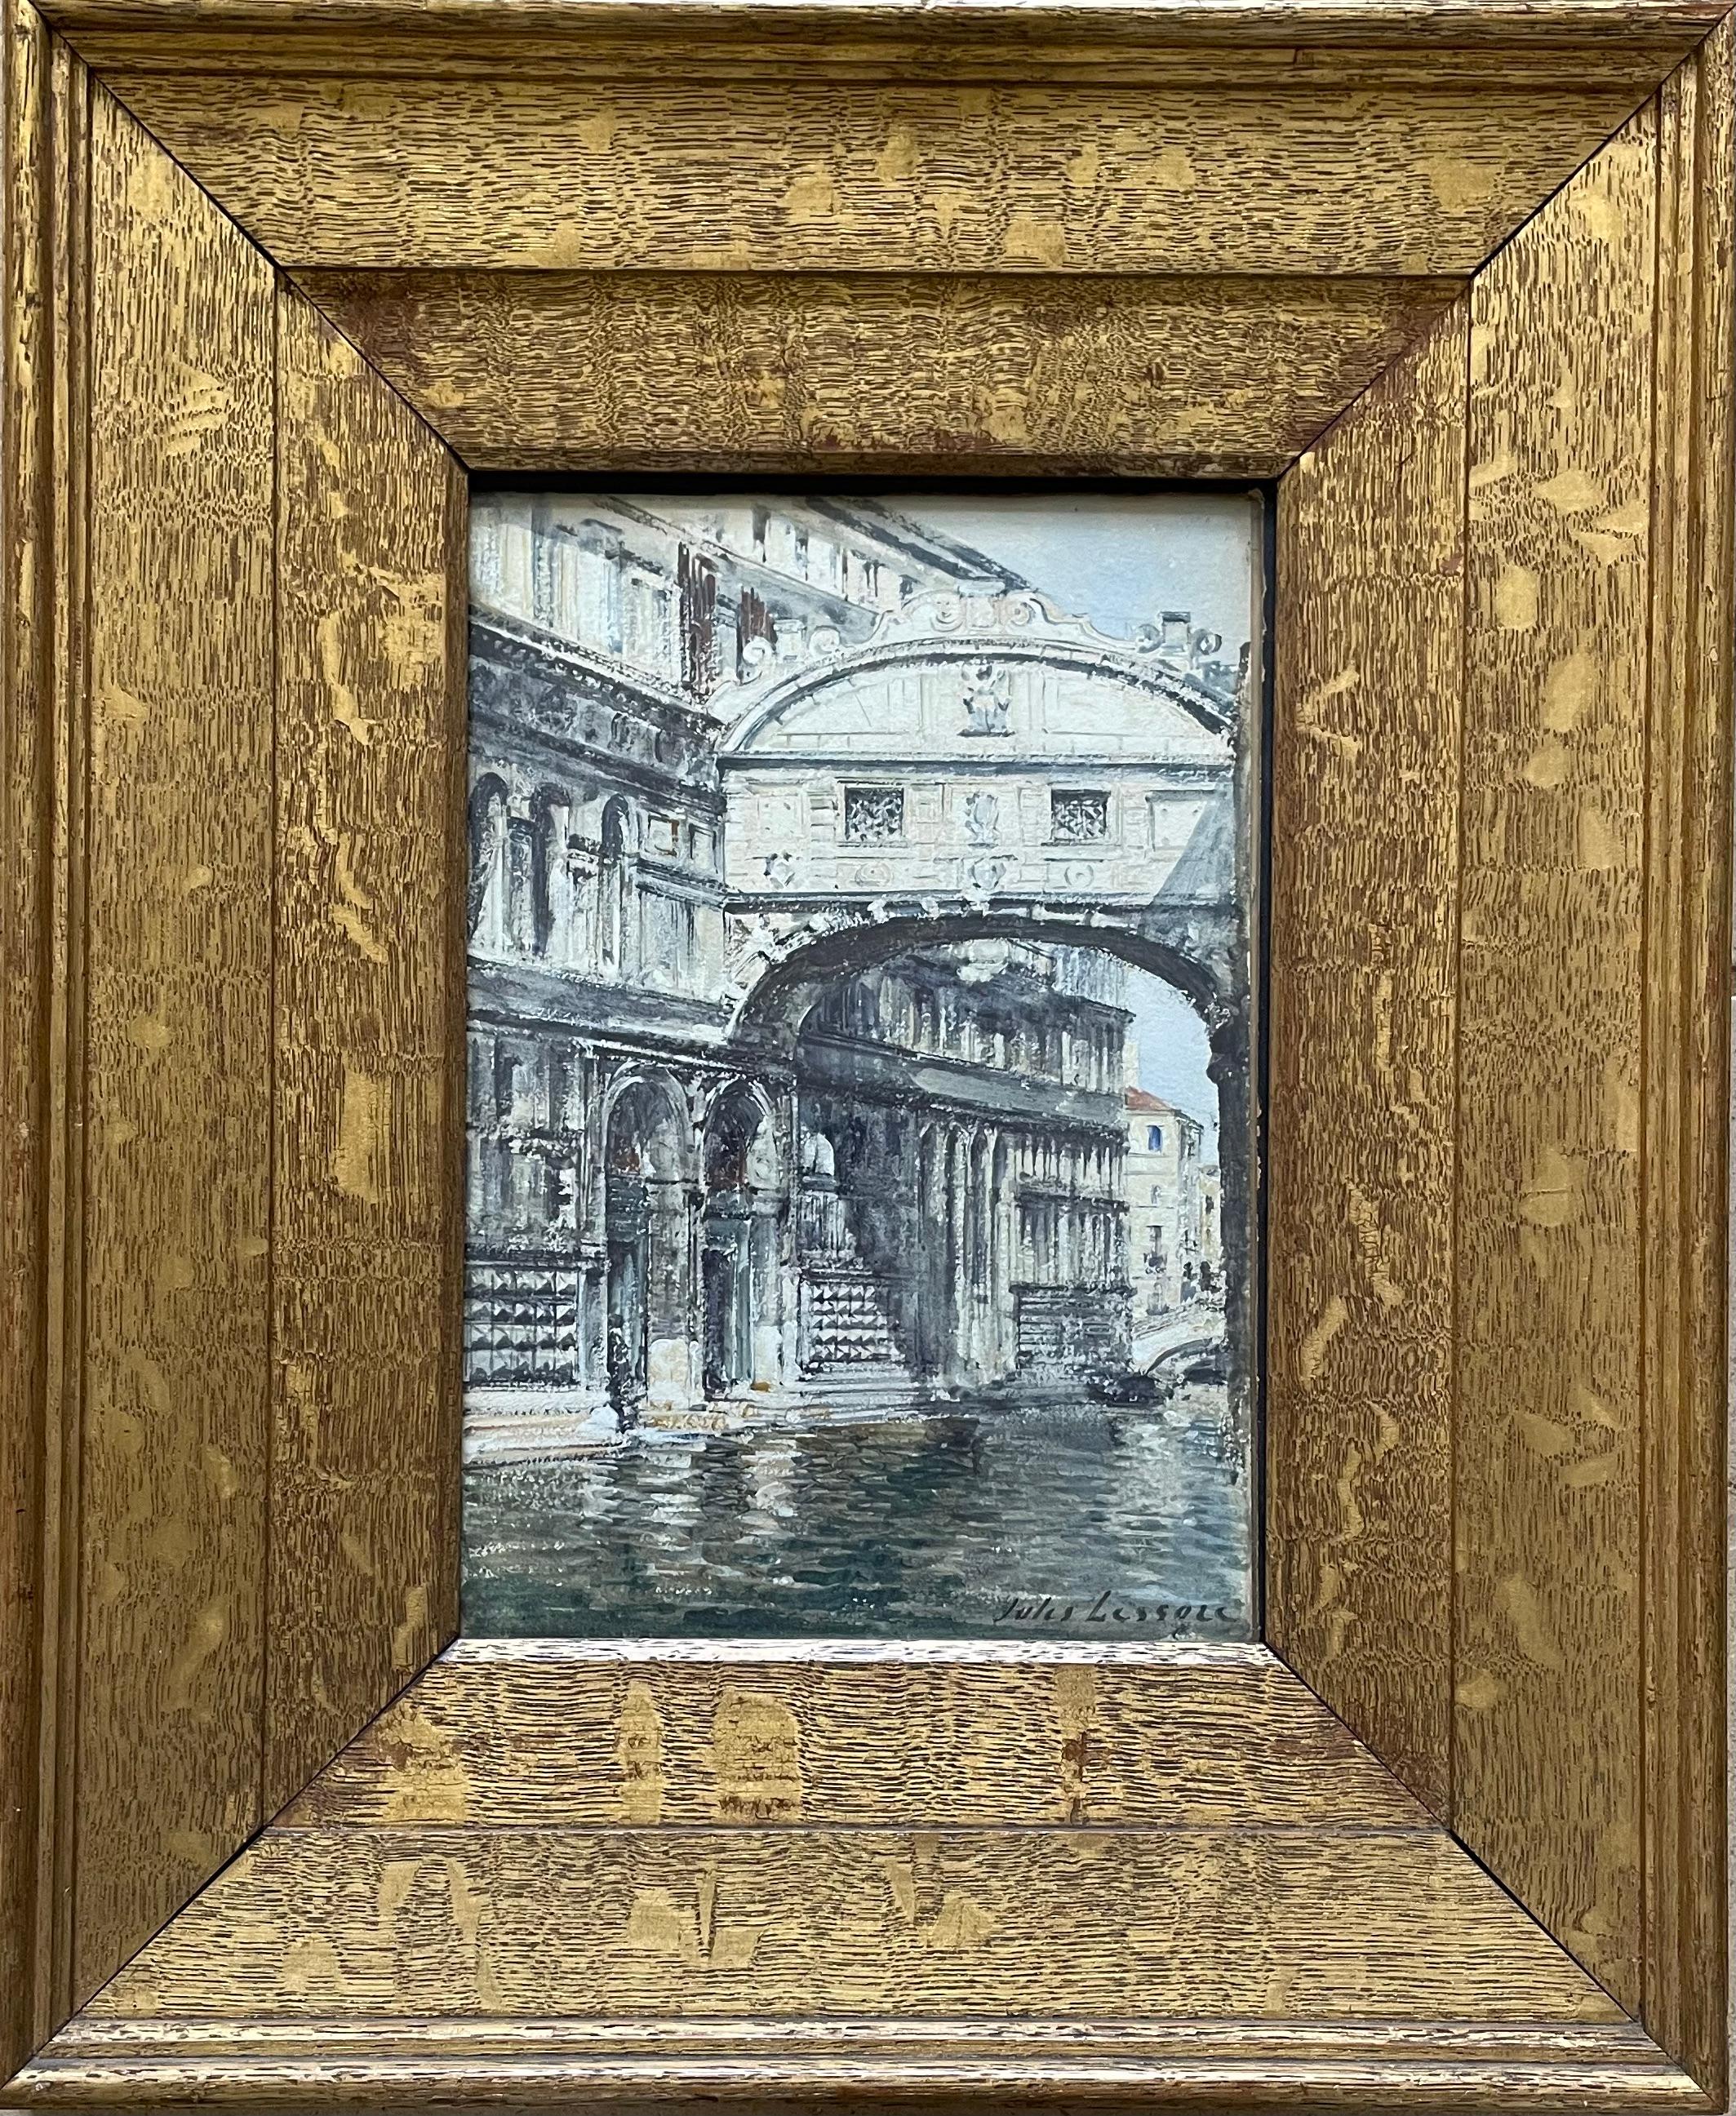 JULES LESSORE
(1849-1892)

The Bridge of Sighs, Venice

Signed l.r.: Jules Lessore
Watercolour
Framed

24.5 by 17 cm., 9 ¾ by 6 ¾ in.
(frame size 44.5 by 36.5 cm., 17 ½ by 14 ½ in.)

Provenance:
With Duncan Miller Fine Art, London.

Jules Lessore